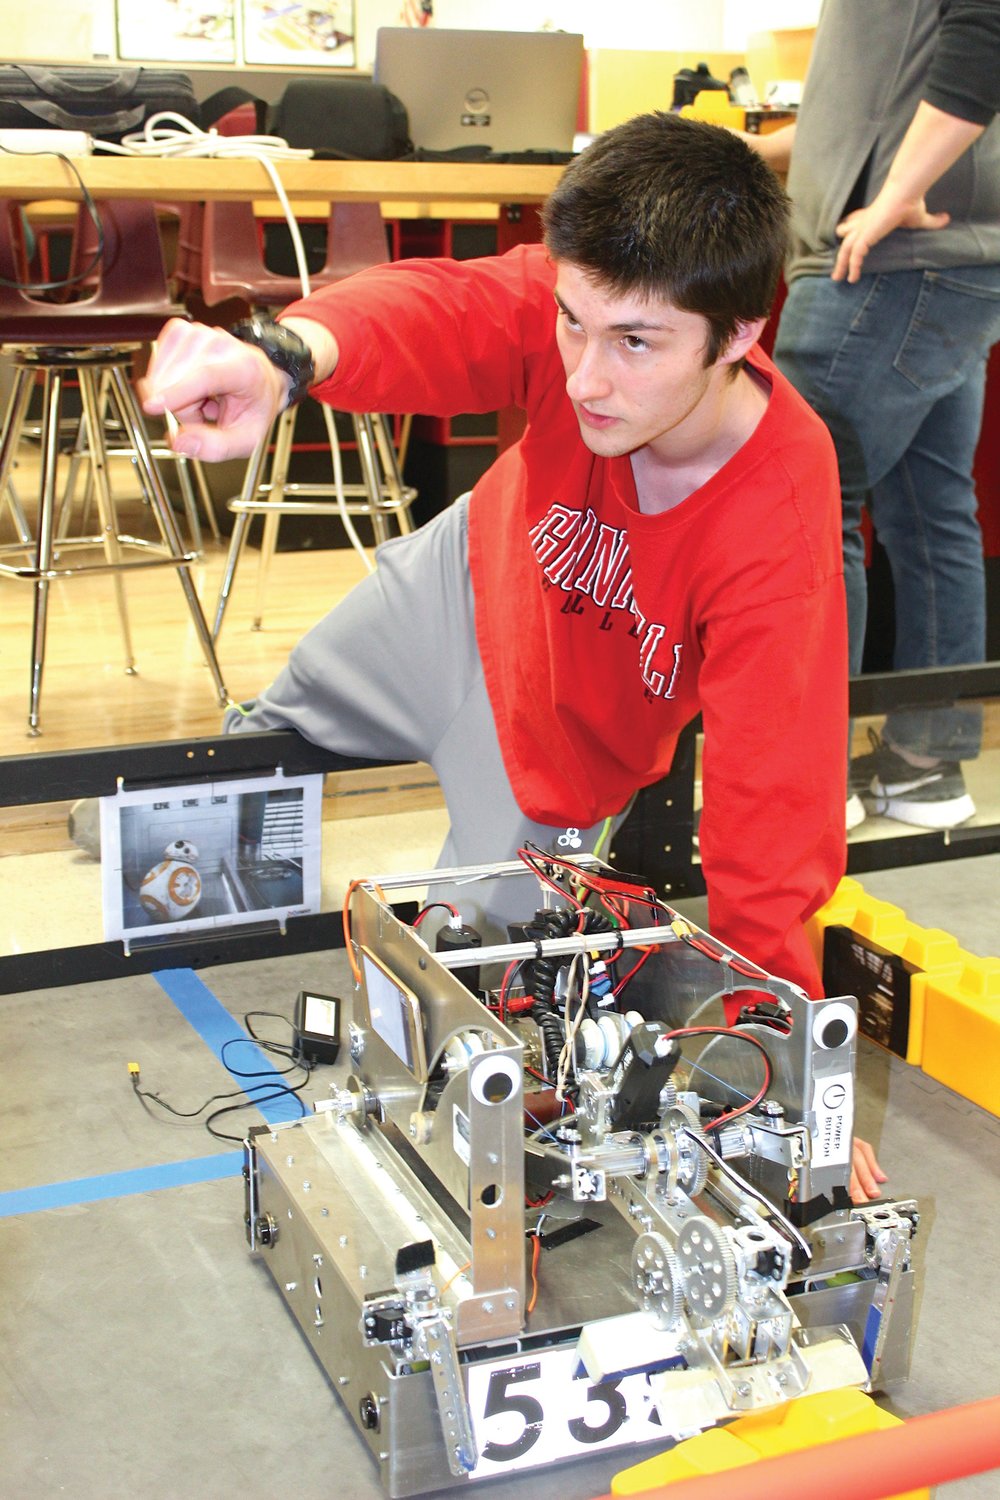 Lead programmer for the TOBOR robotics team at Crawfordsville High School, senior and fourth-year member Luka Mikek discusses how his team's robot operates. The devices utilize apps on ordinary smart phones as key links in the computing process.